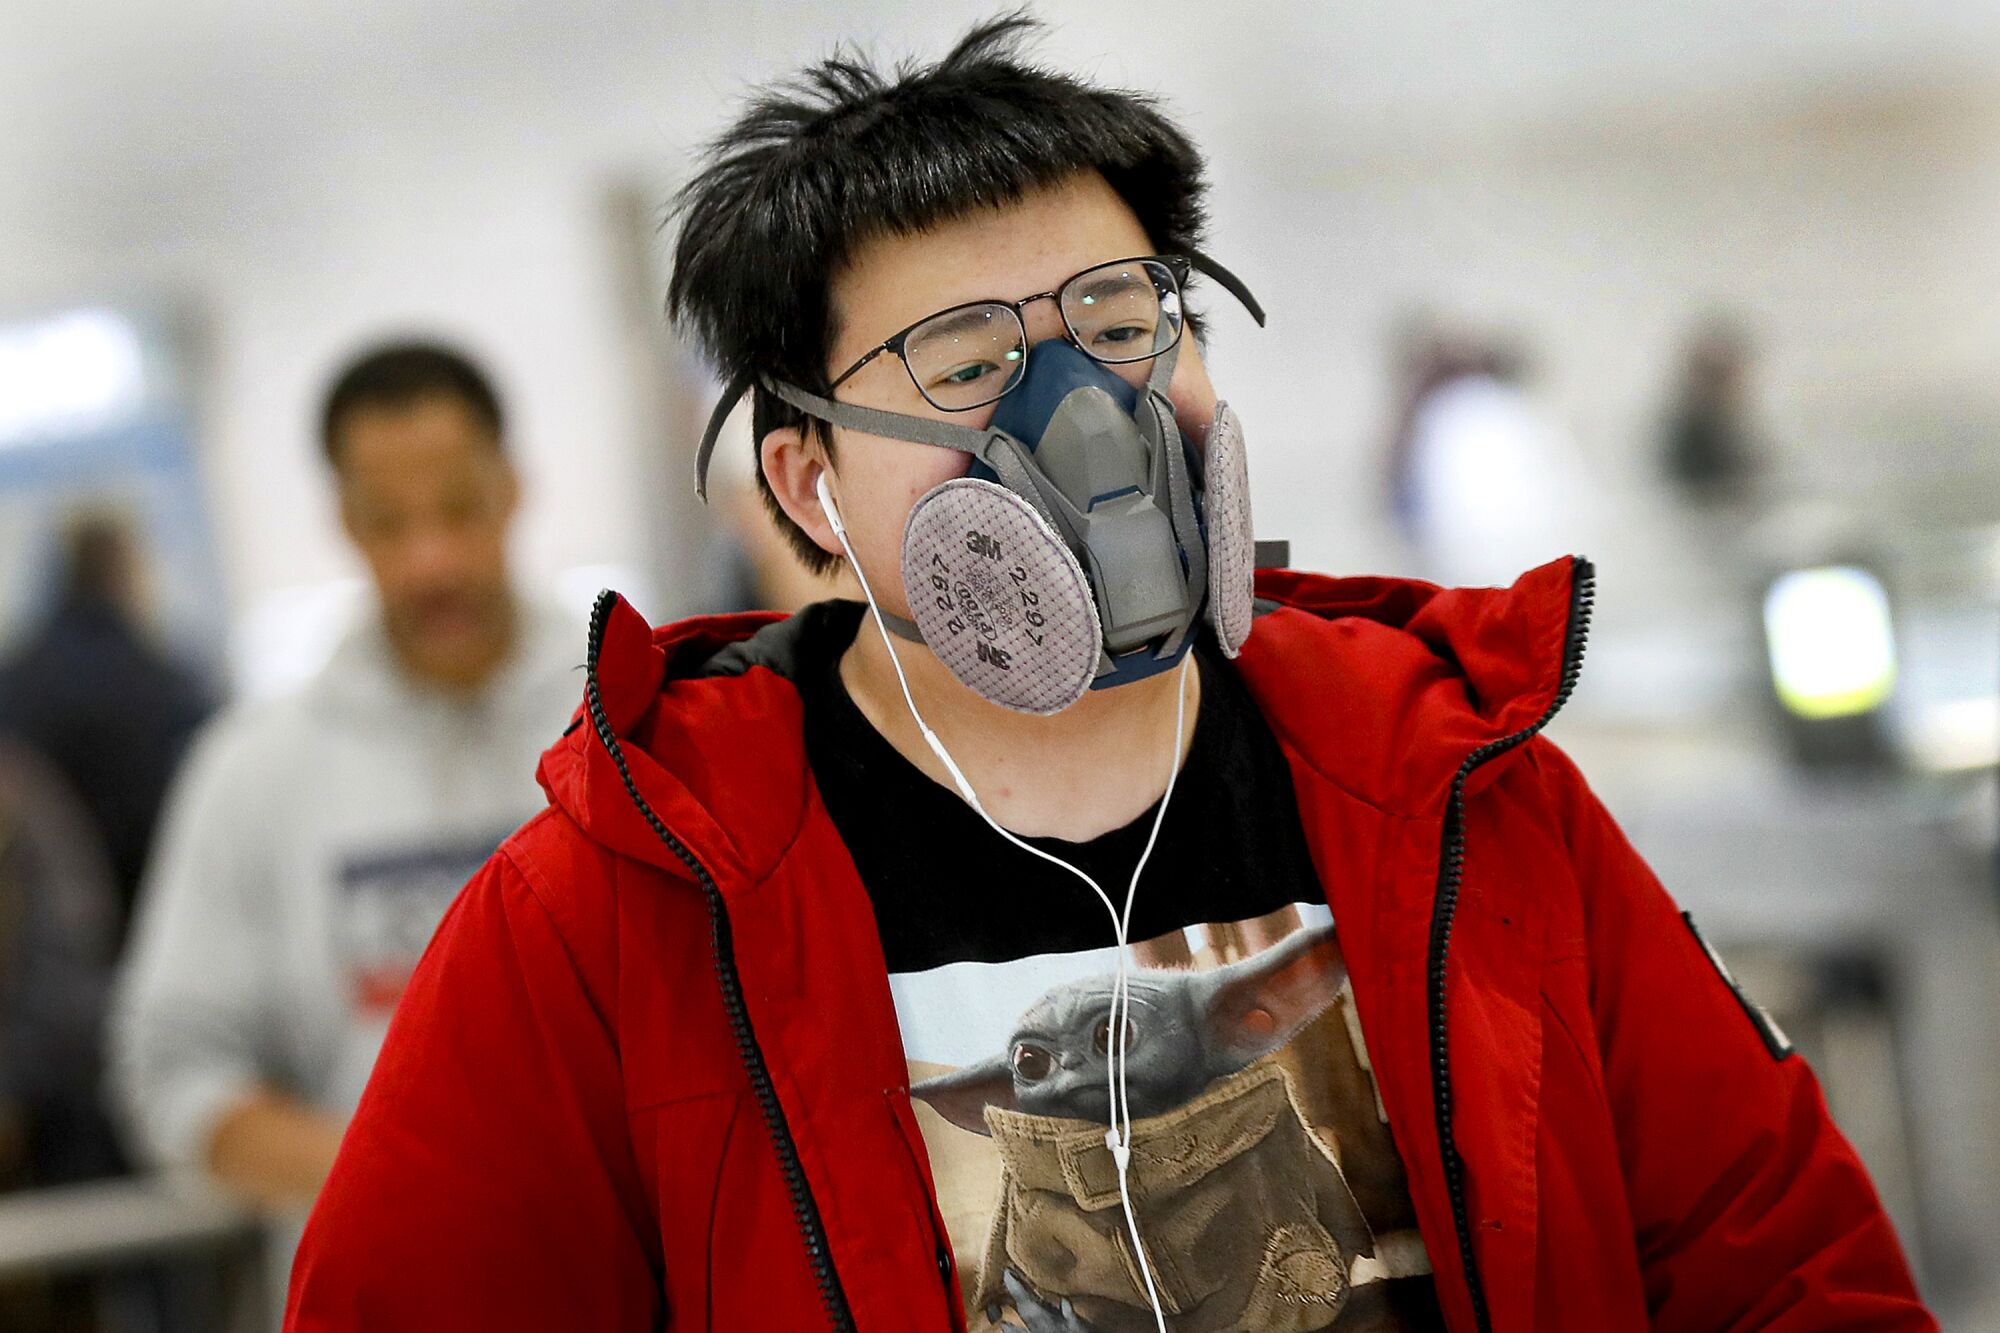 UNITED STATES: A commuter dons a face mask as he navigates New York City's transit system.